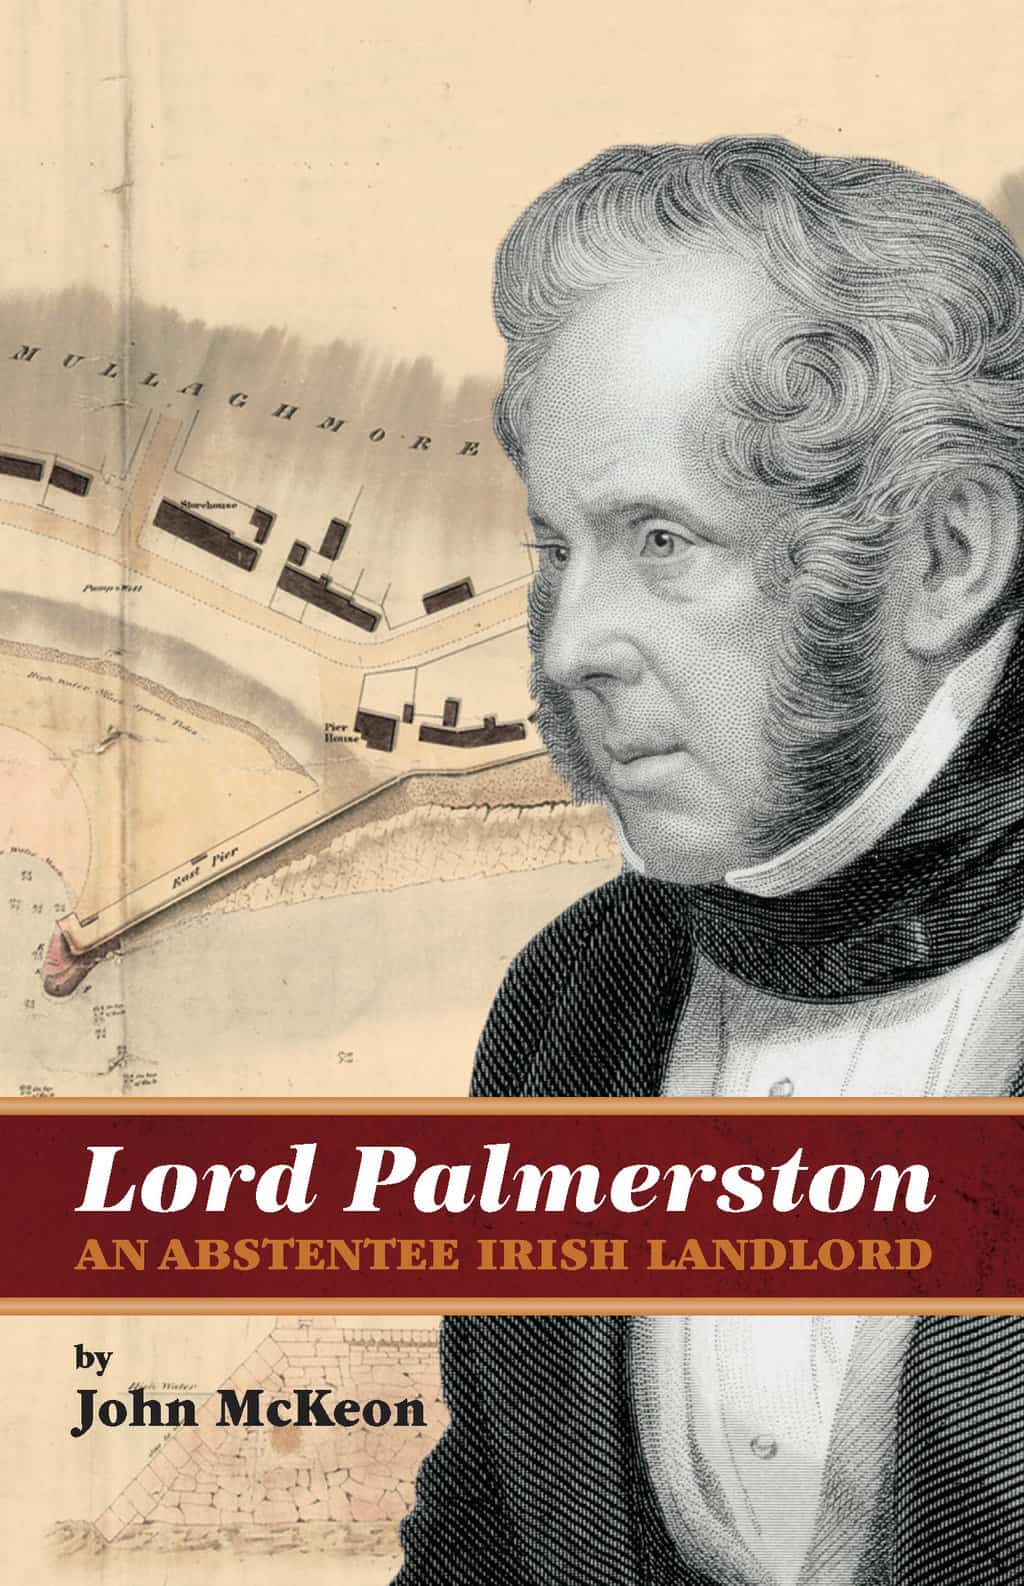 Lord Palmerston book cover only